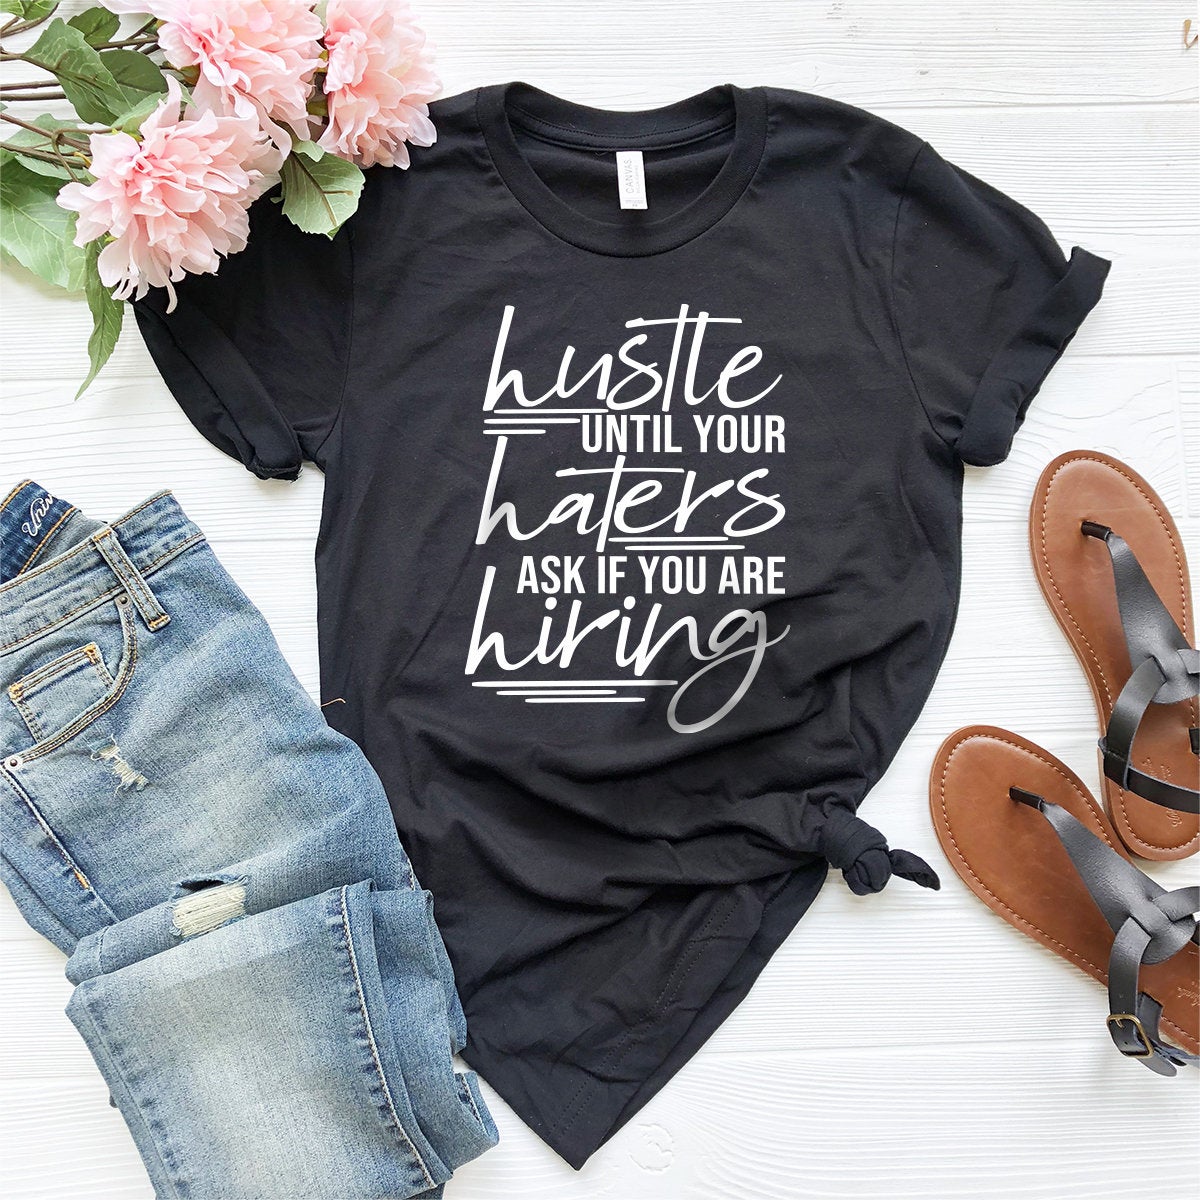 Hustle Hard Shirt, Girl Boss Shirt, Haters Gonna Hate Shirt Hustle Until Your Haters Ask If You Are Hiring Shirt, Run This Shirt, Hustle Tee - Fastdeliverytees.com